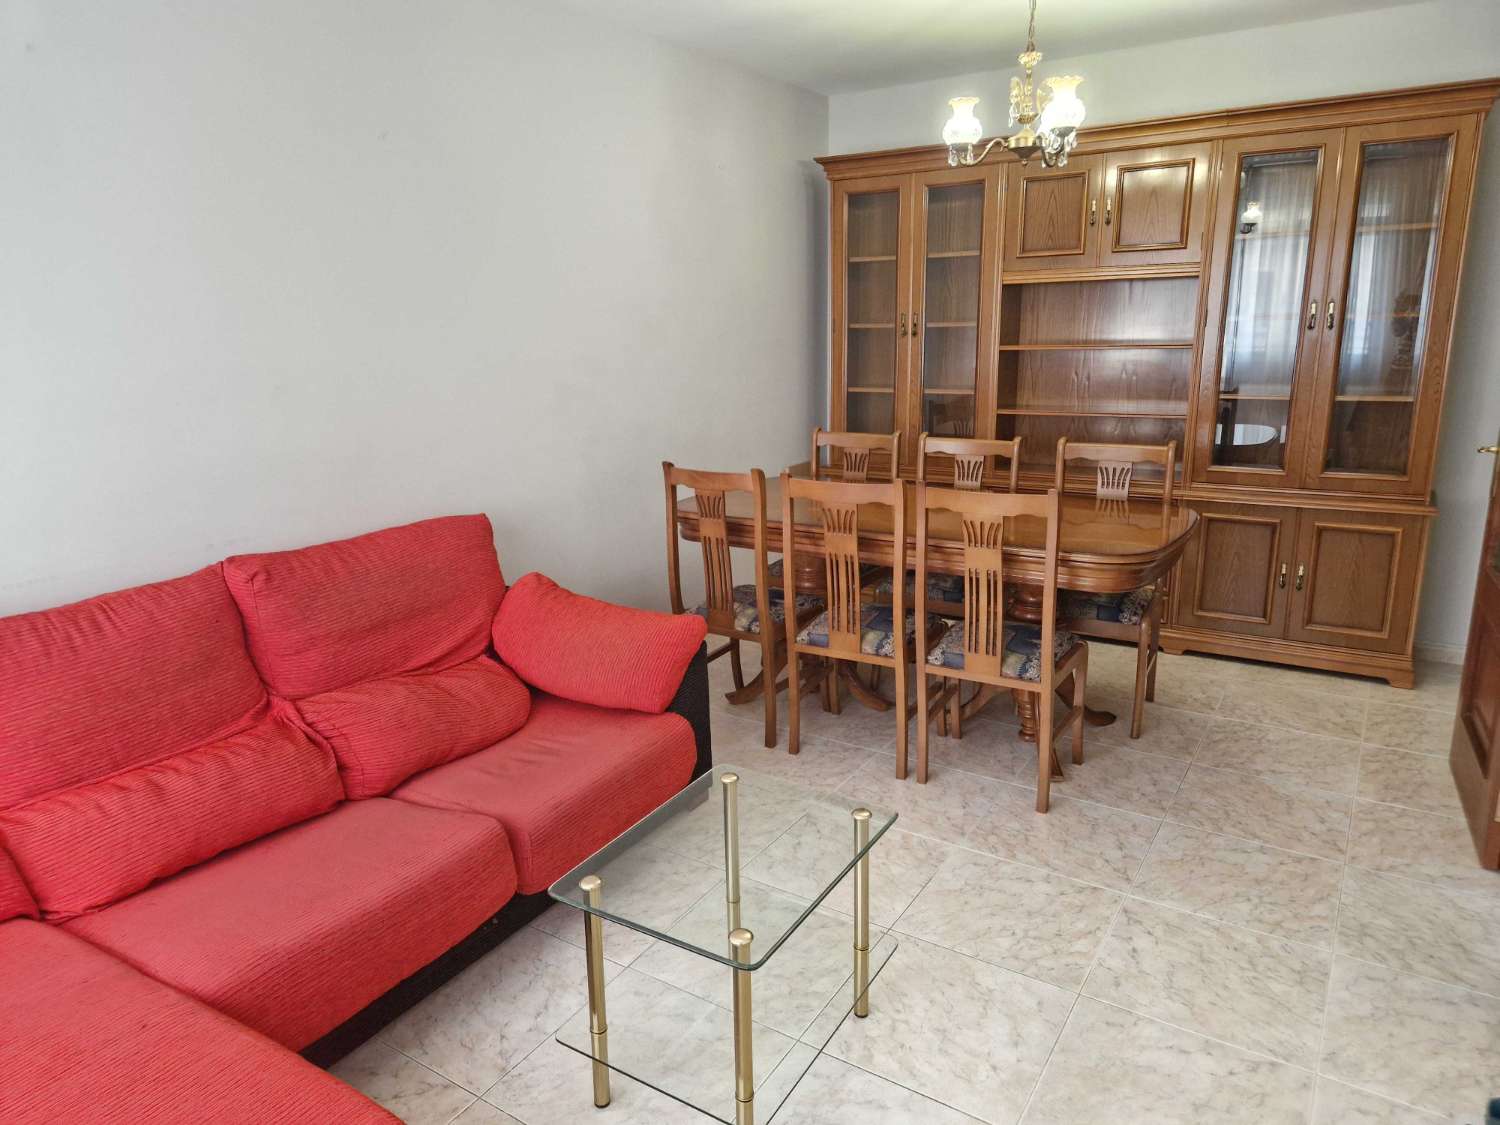 Flat for sale in Negreira